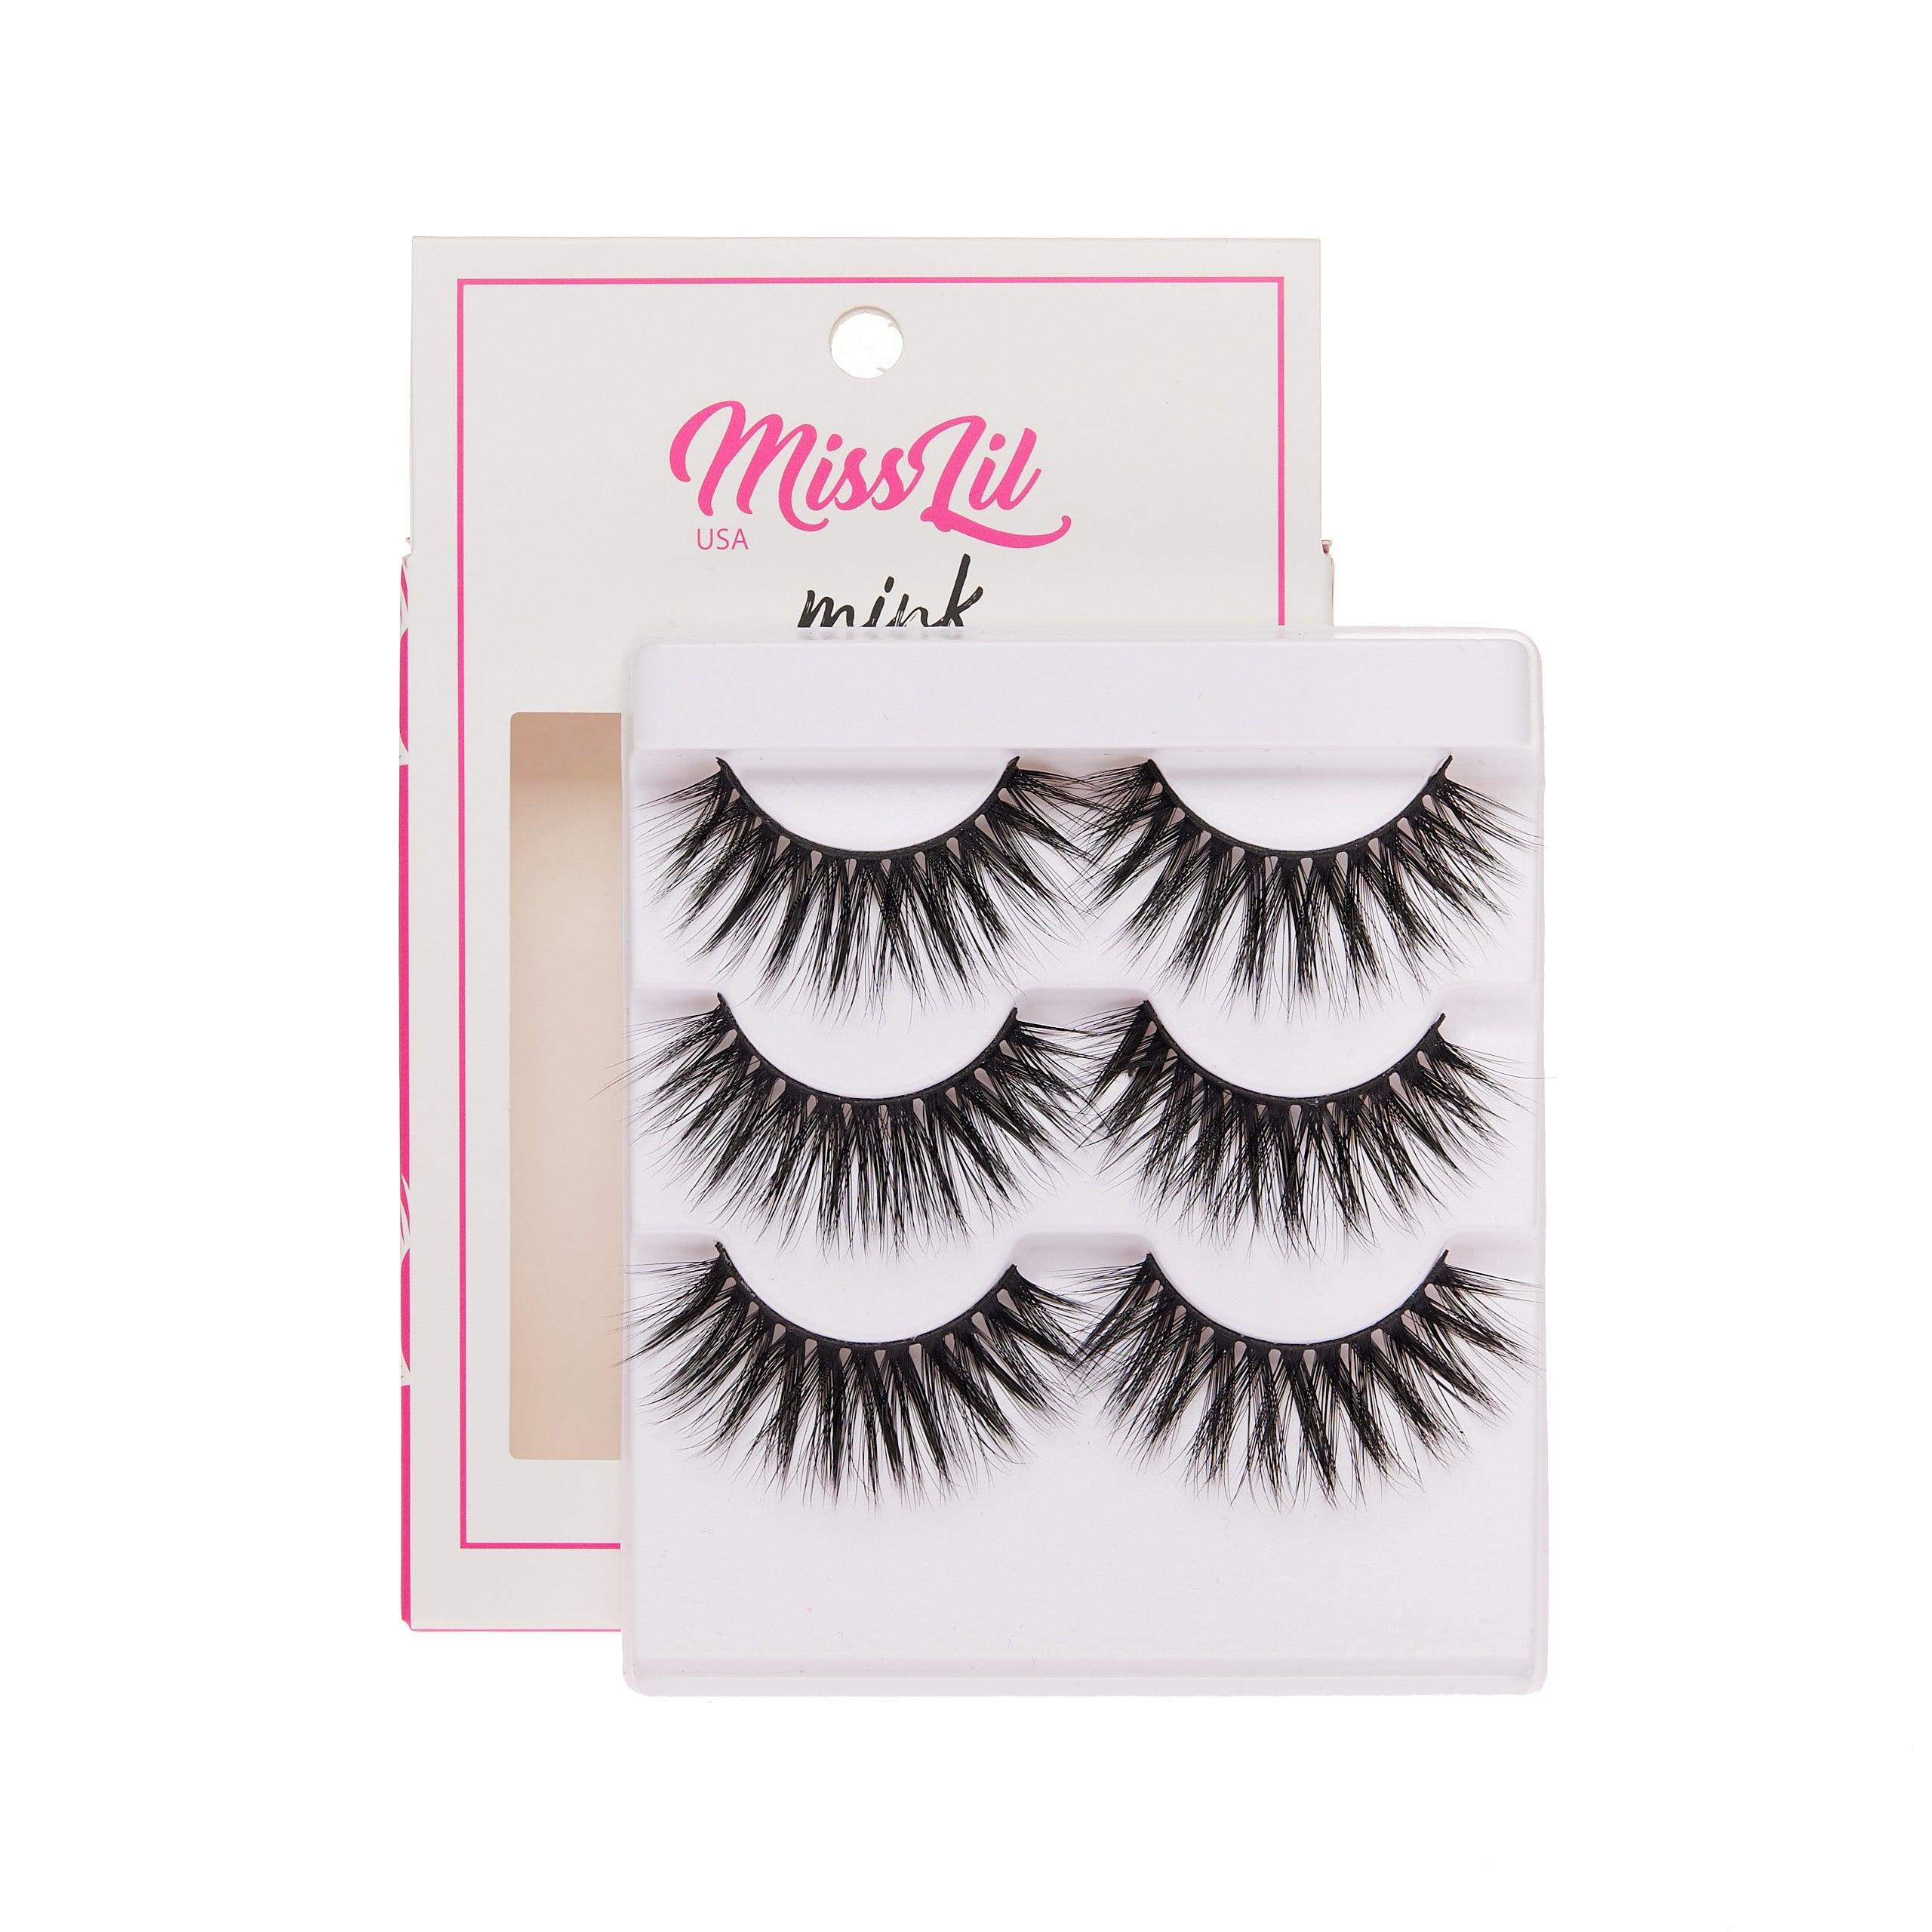 3-Pair Faux Mink Effect Eyelashes - Lash Party Collection #20 - Pack of 3 - Miss Lil USA